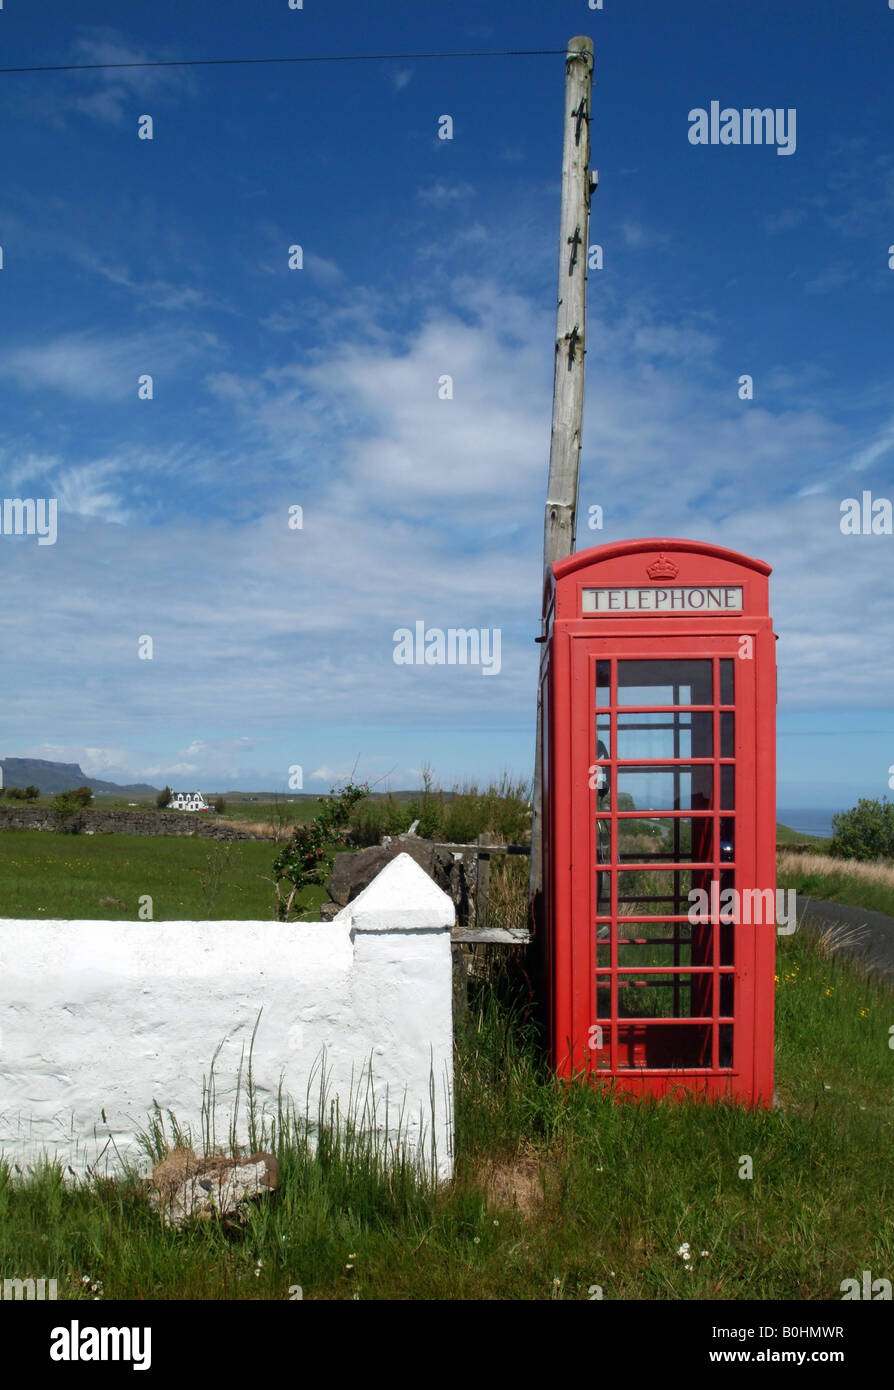 Old red phone booth, telephone box in Scotland, UK Stock Photo